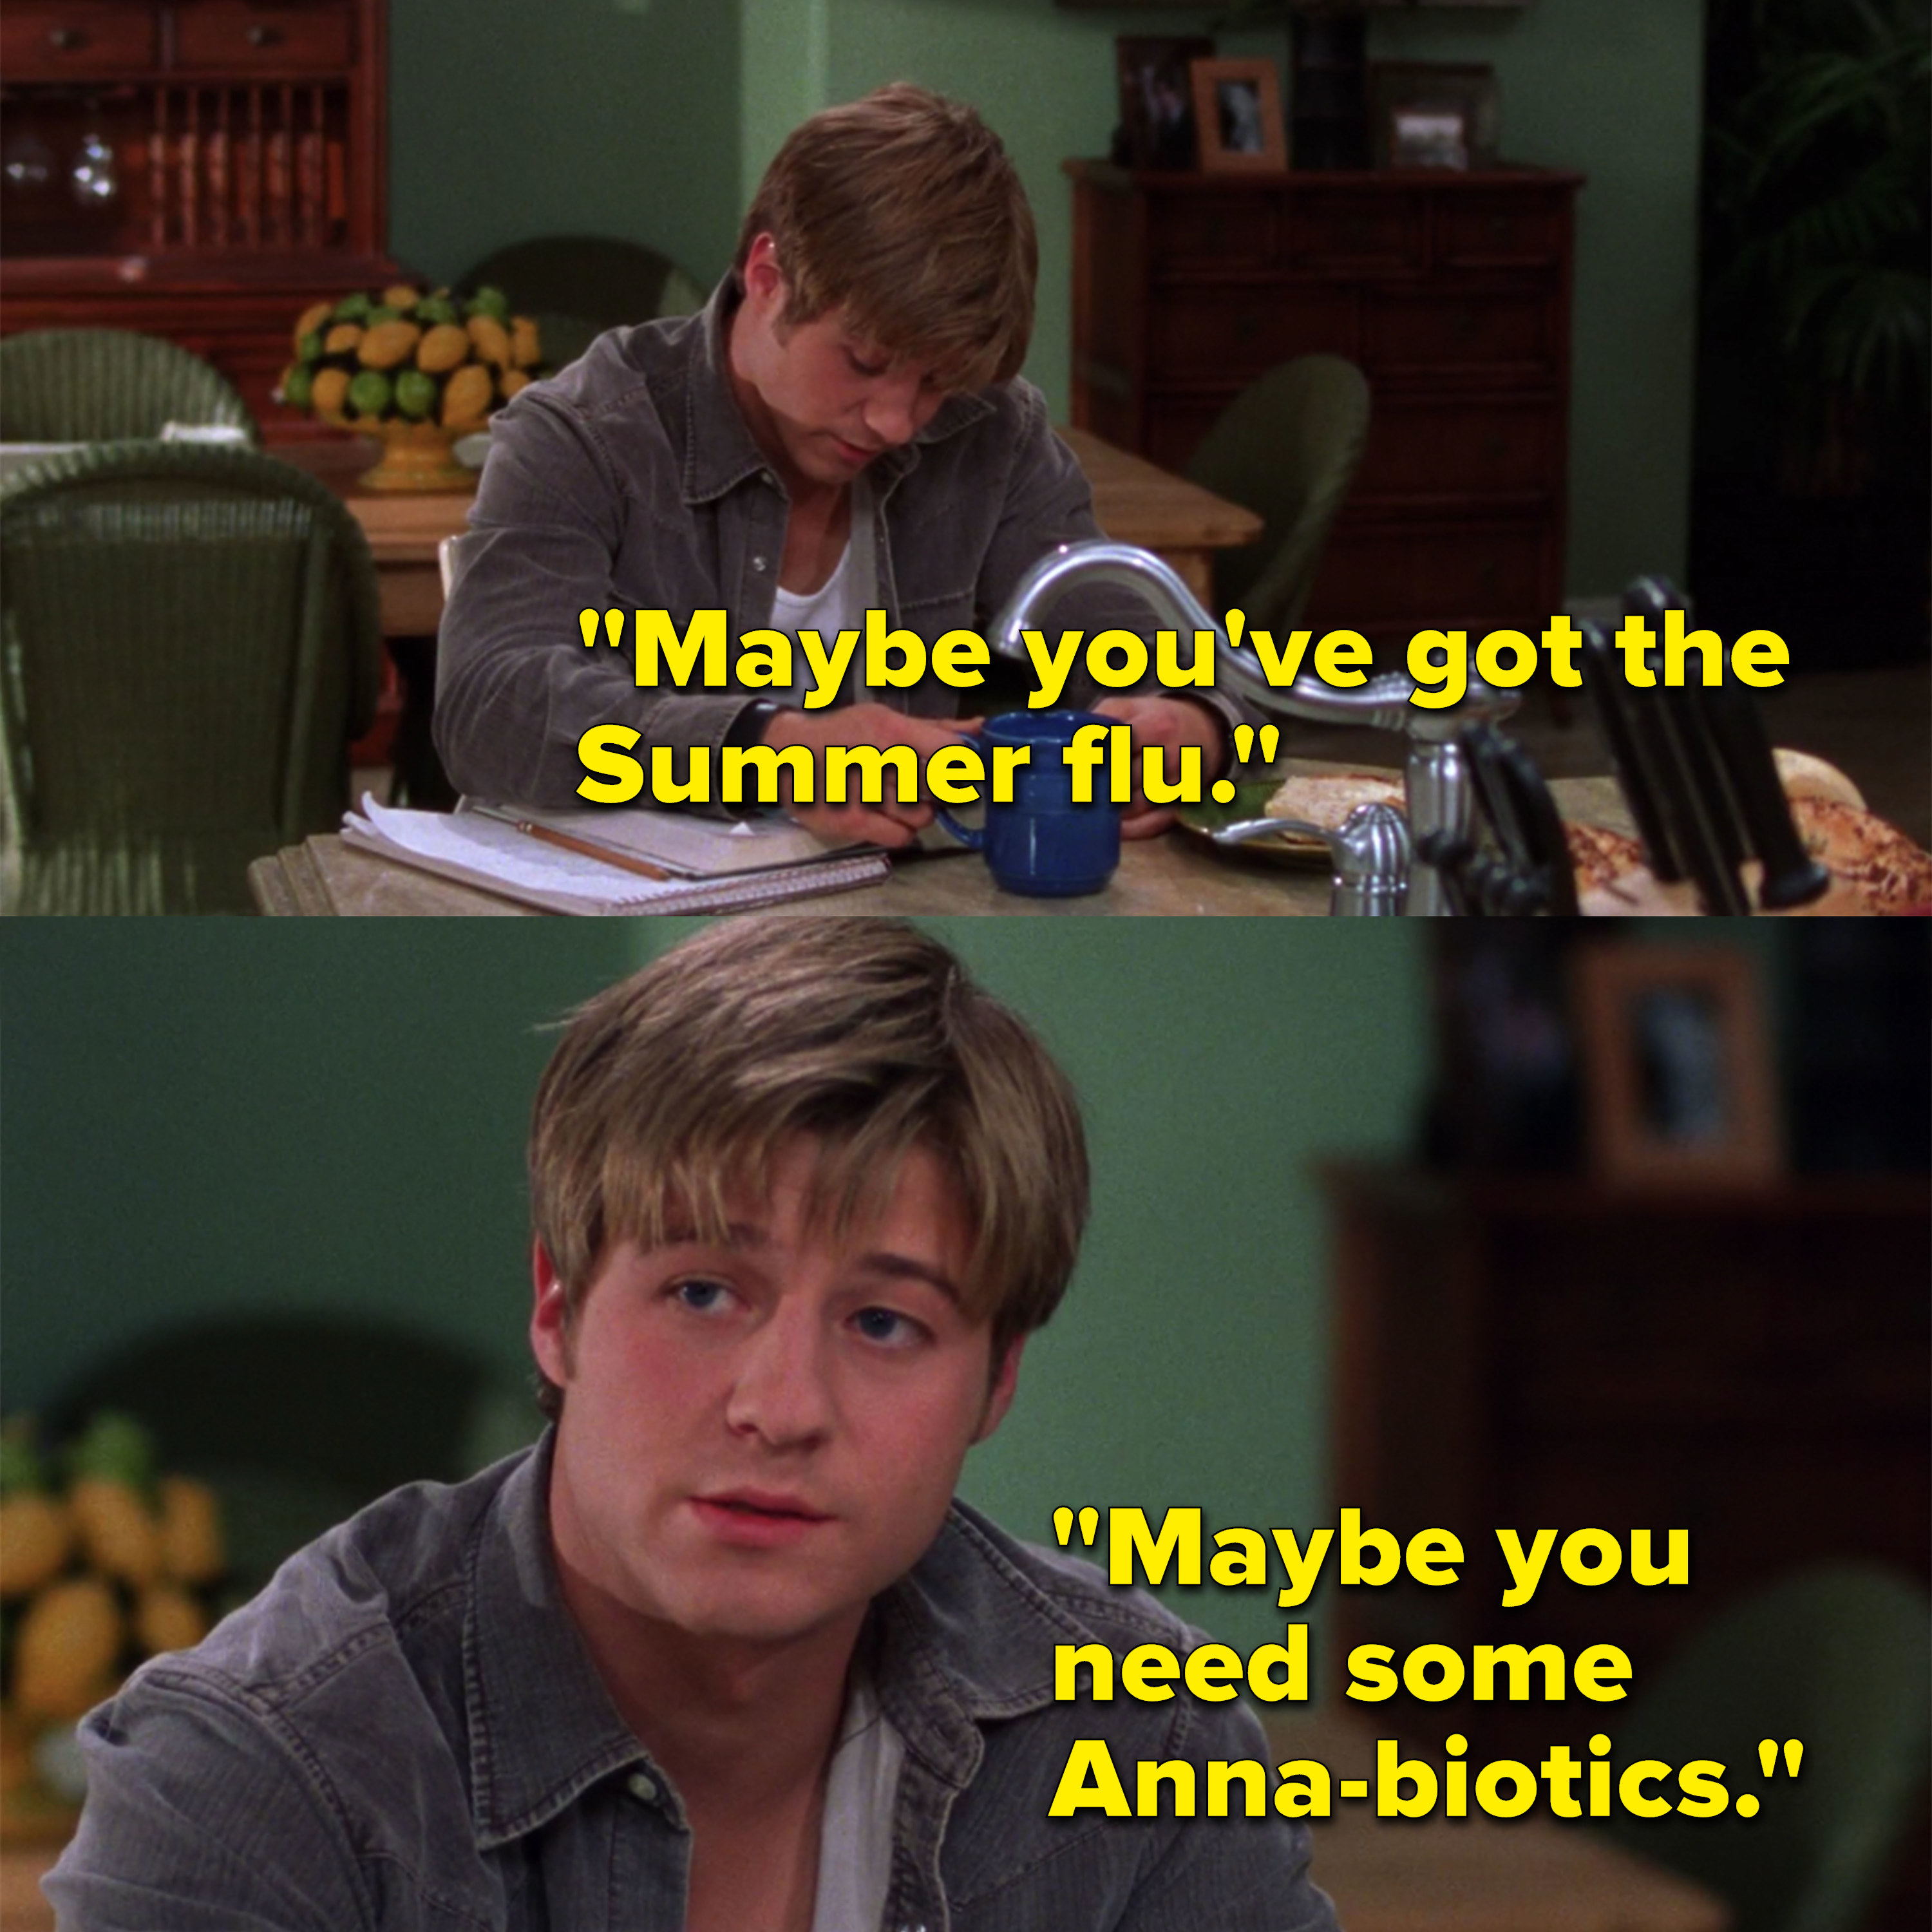 Ryan: &quot;maybe you&#x27;ve got the Summer flu, maybe you need some Anna-biotics&quot;